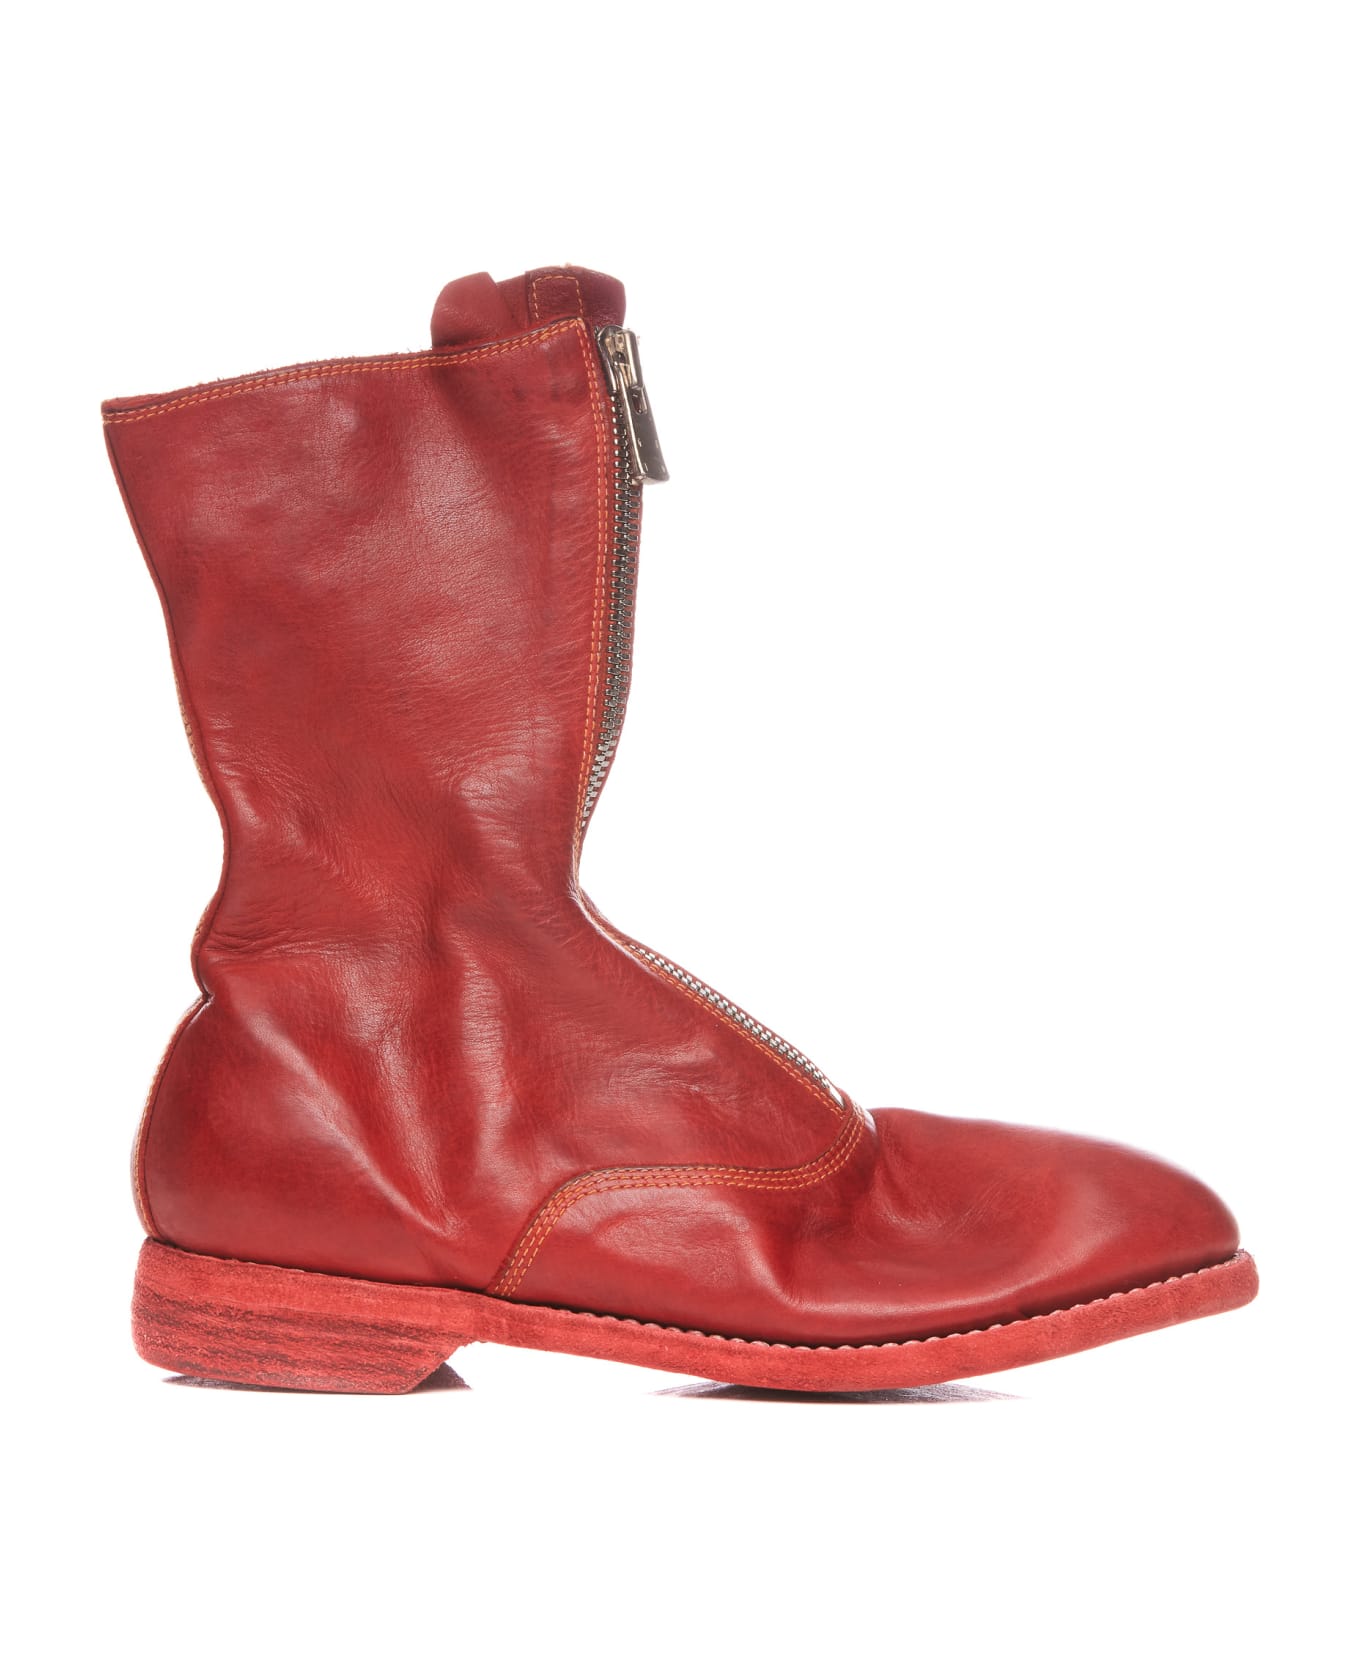 Guidi 310 Boots - Red